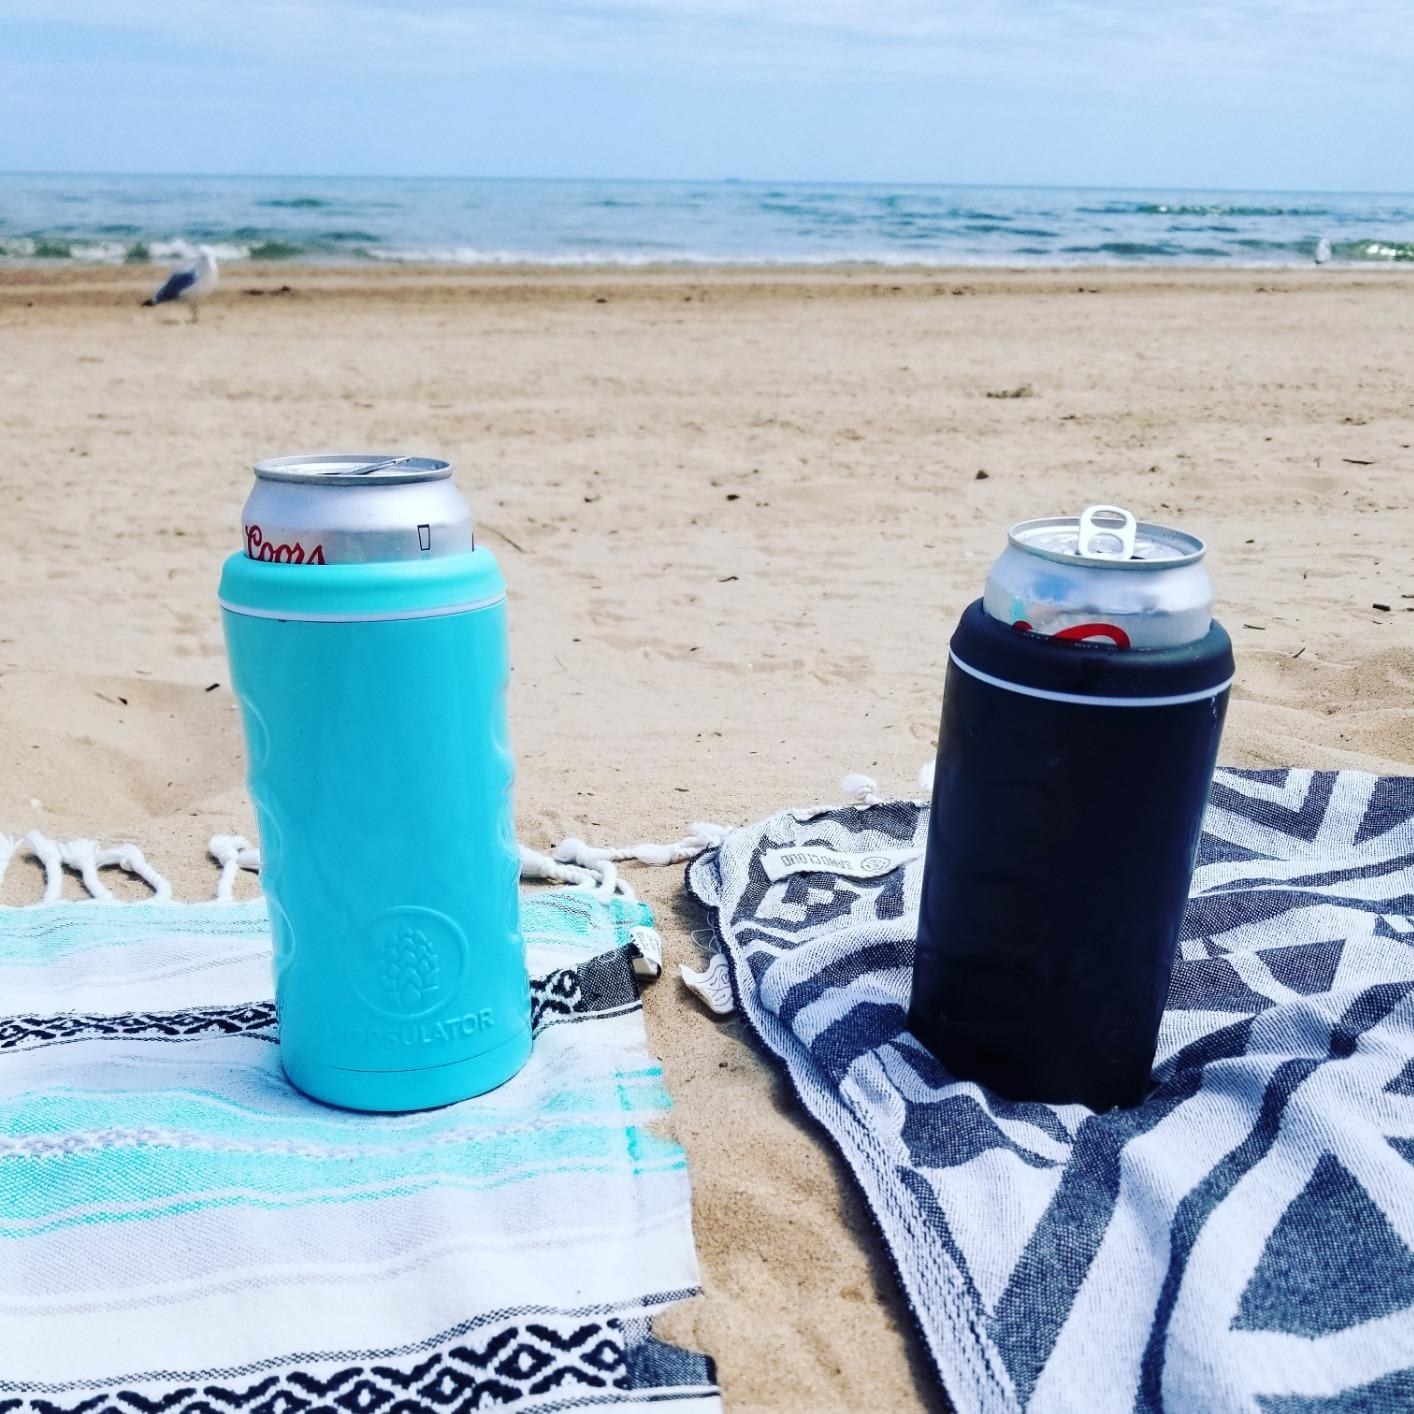 two cans (one blue, one black) holding sodas on the beach